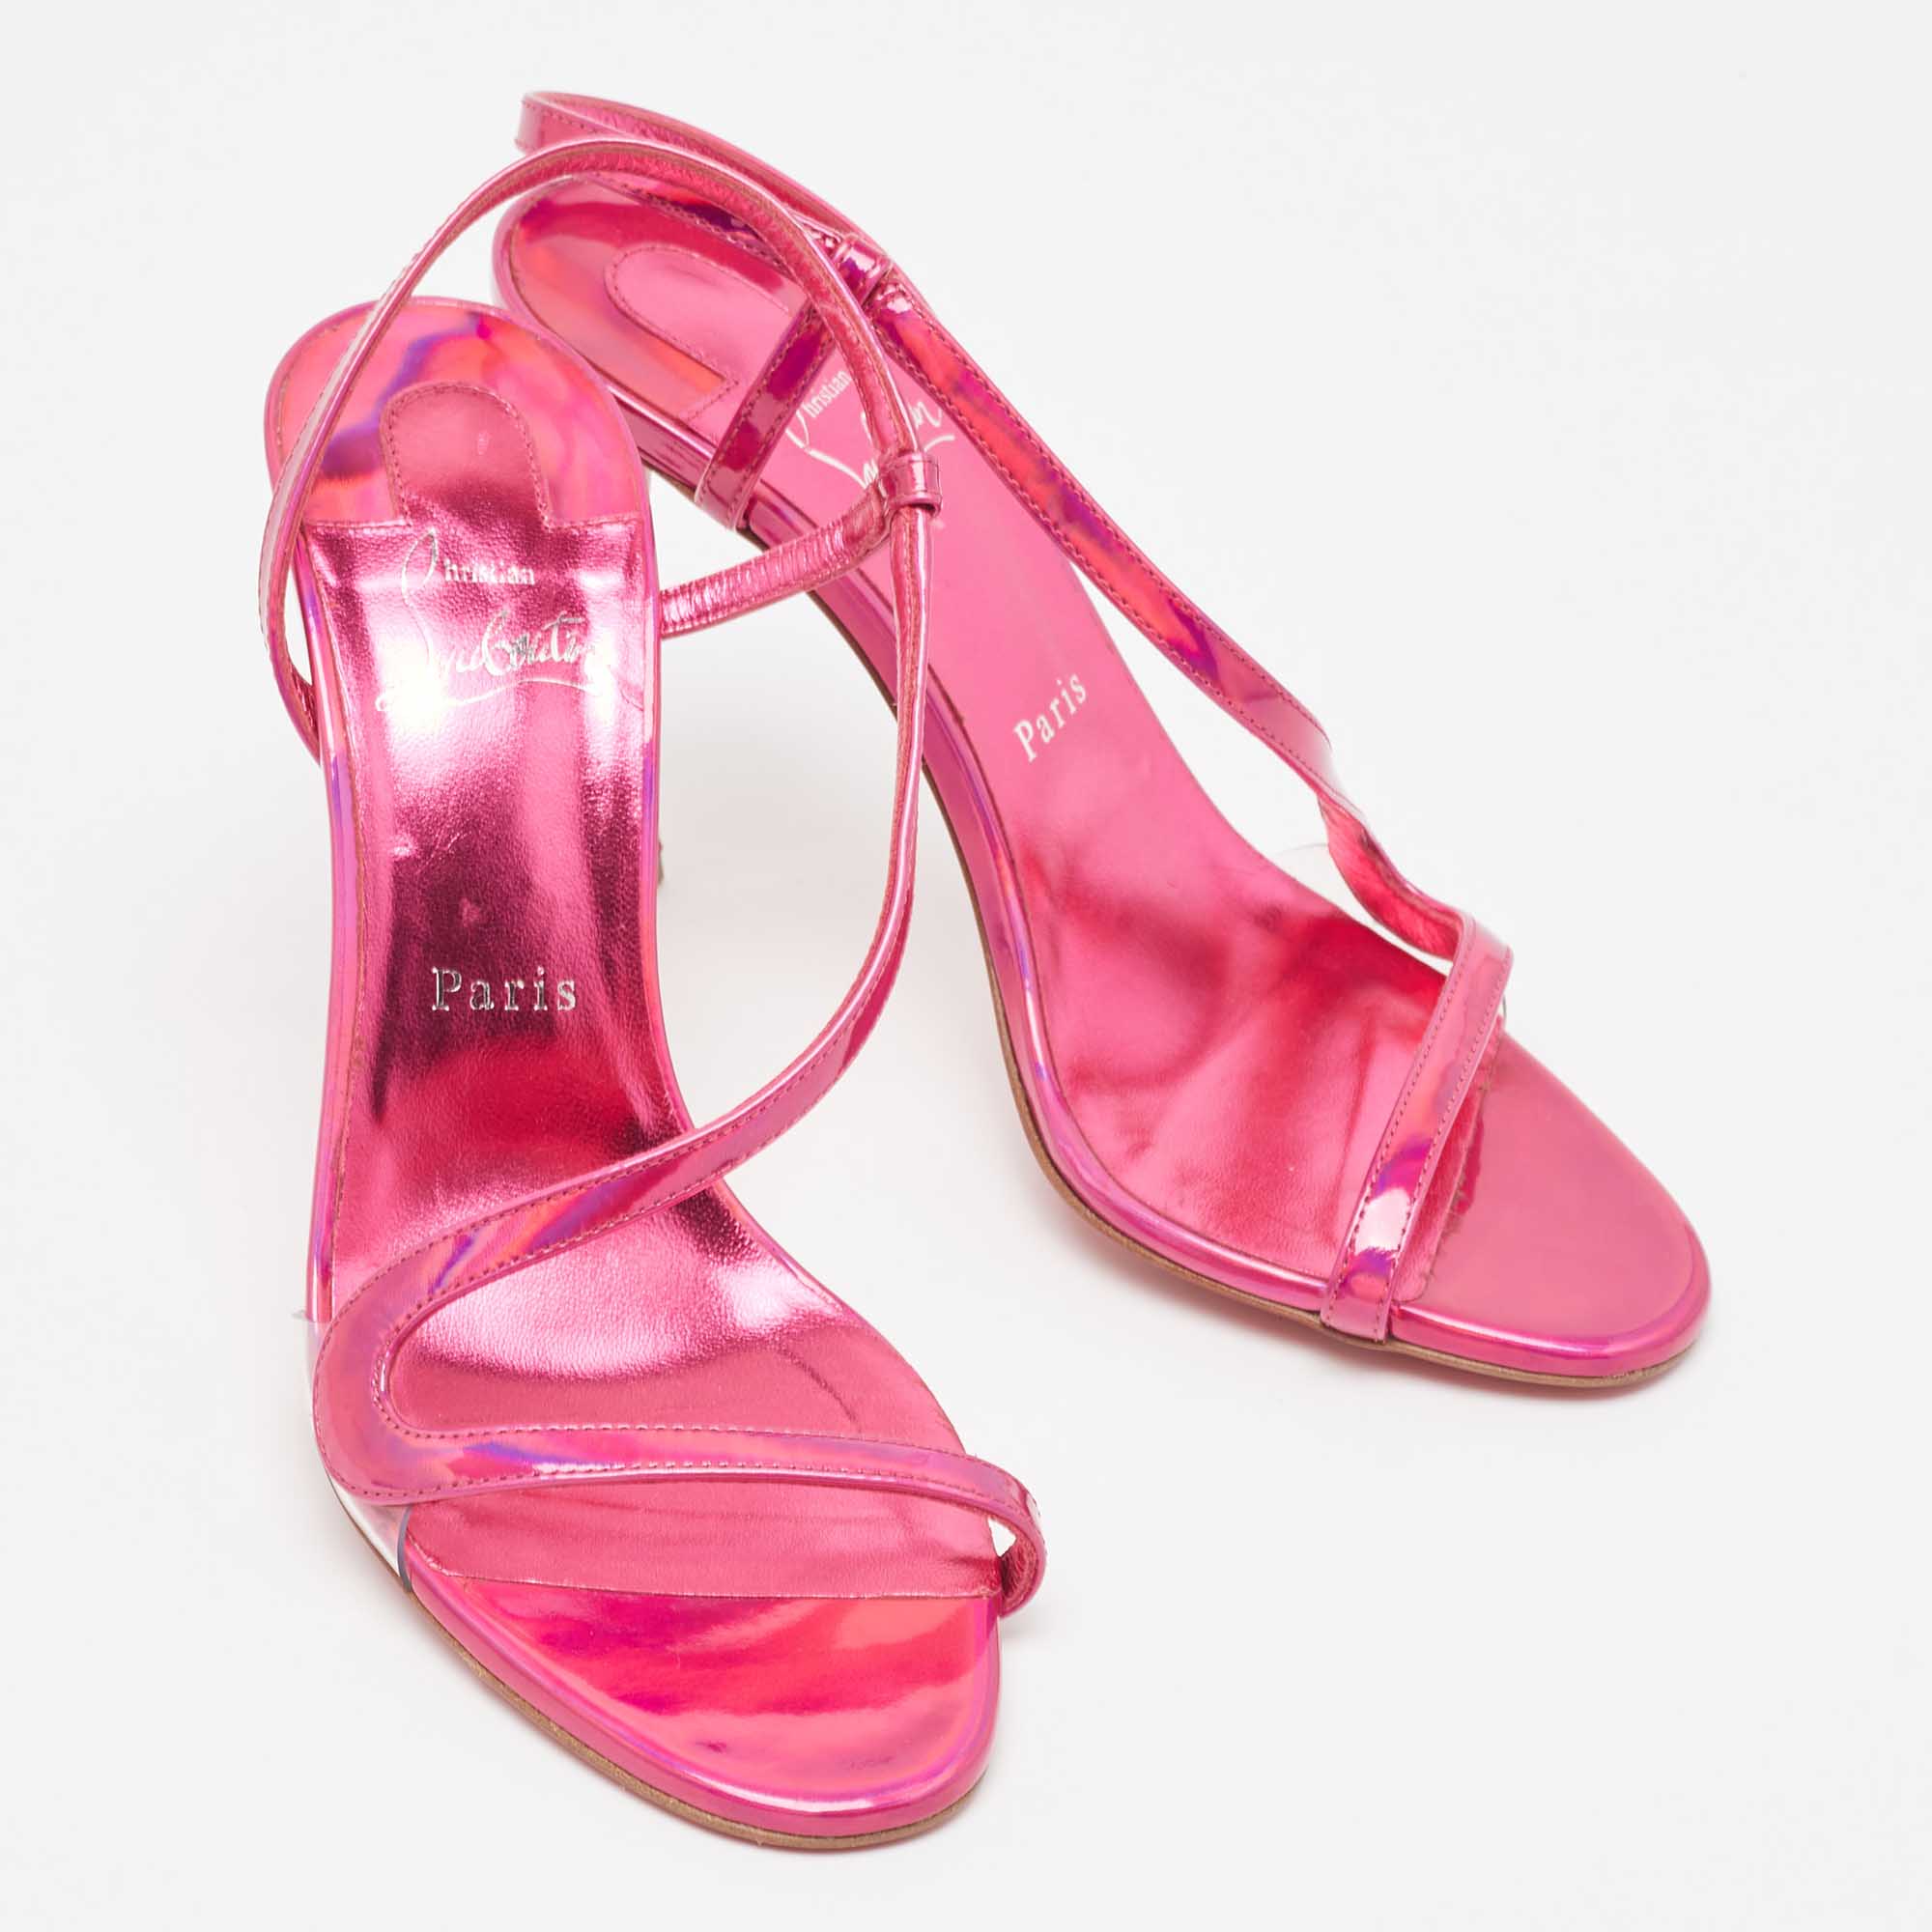 Christian Louboutin Pink Iridescent Leather Rosalie Sandals Size 38